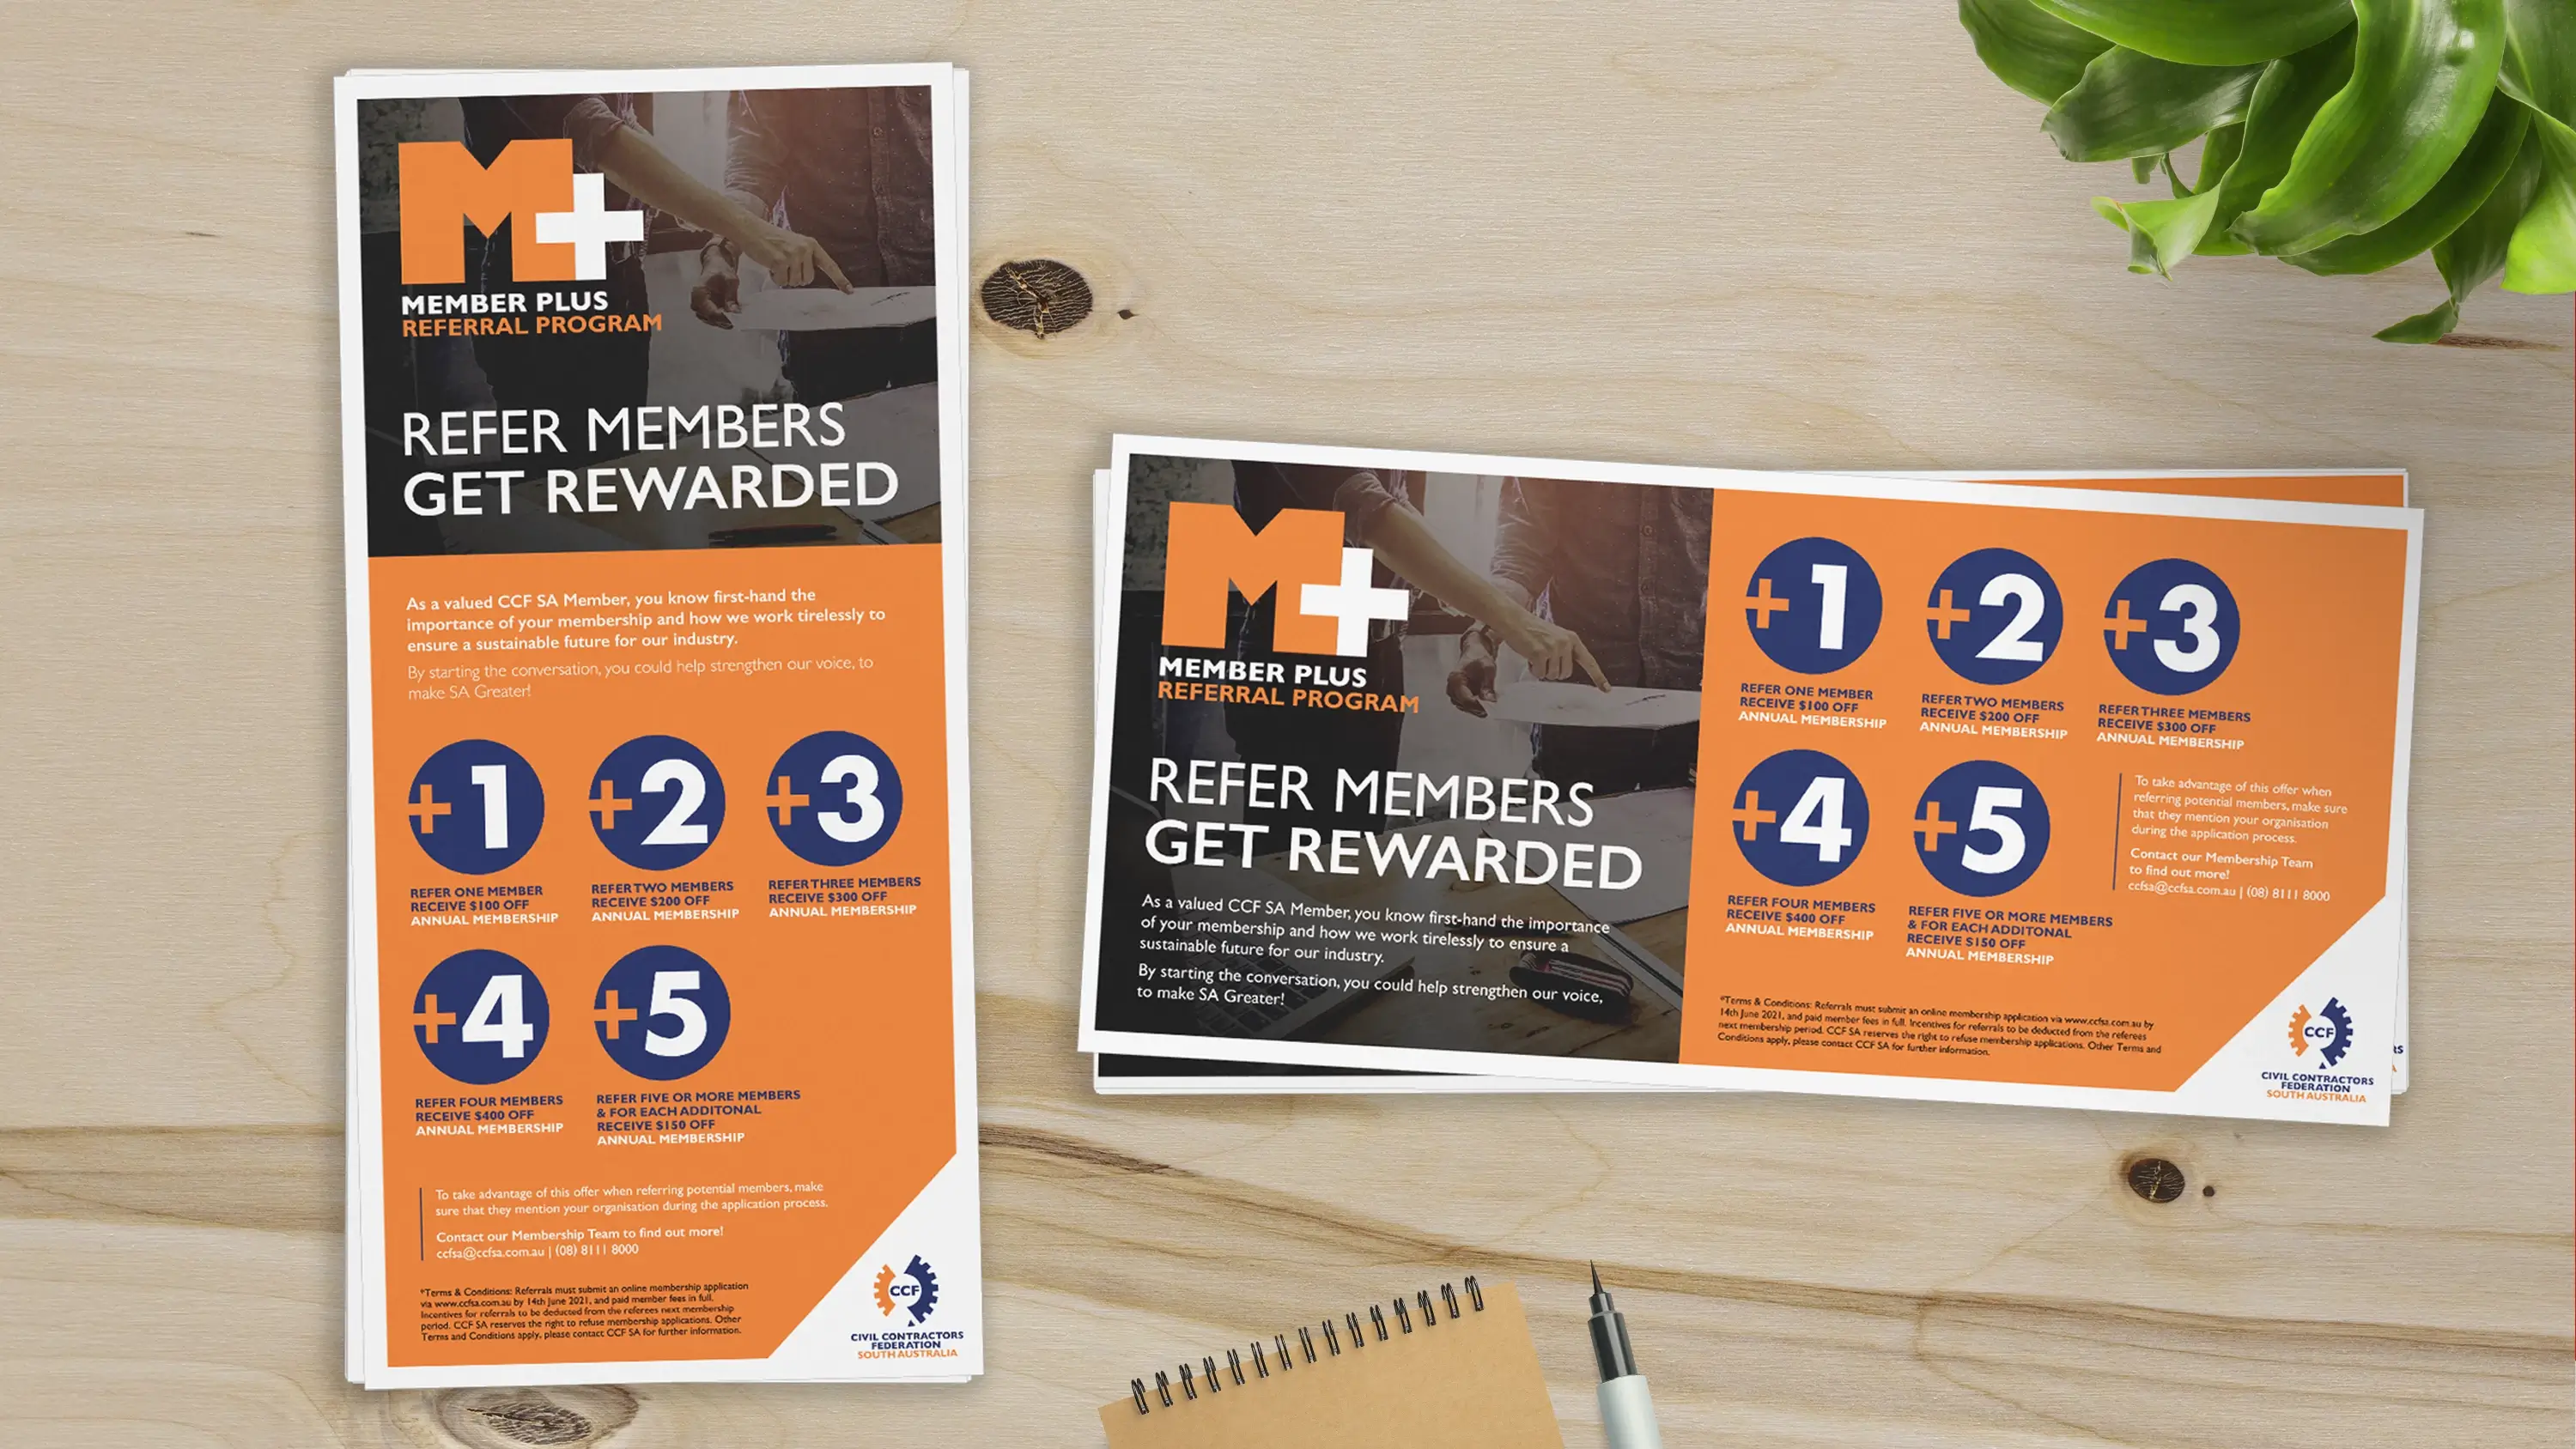 Two DL brochures – landscape and portrait versions of the same flyer, for the Member Plus referral plan.